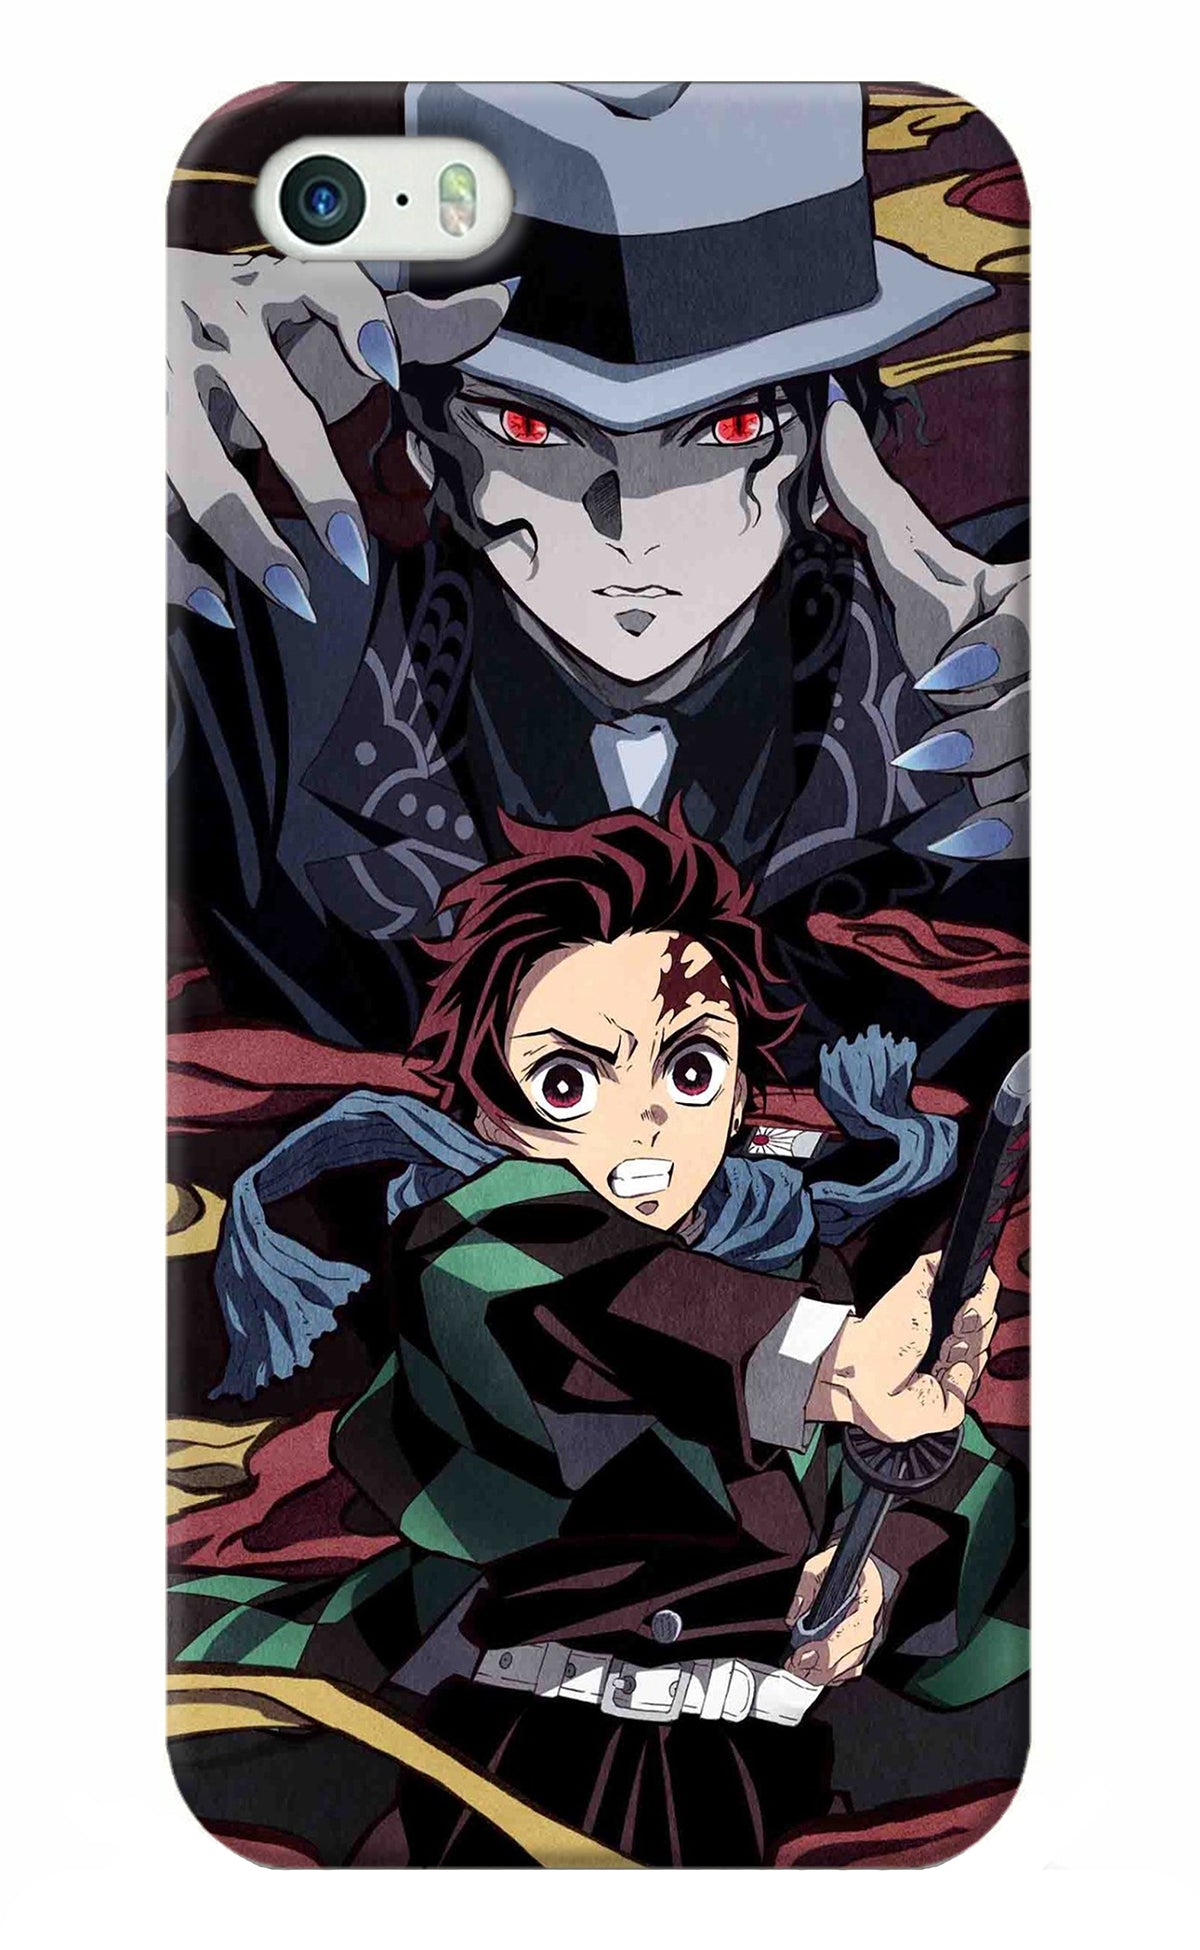 Demon Slayer iPhone 5/5s Back Cover